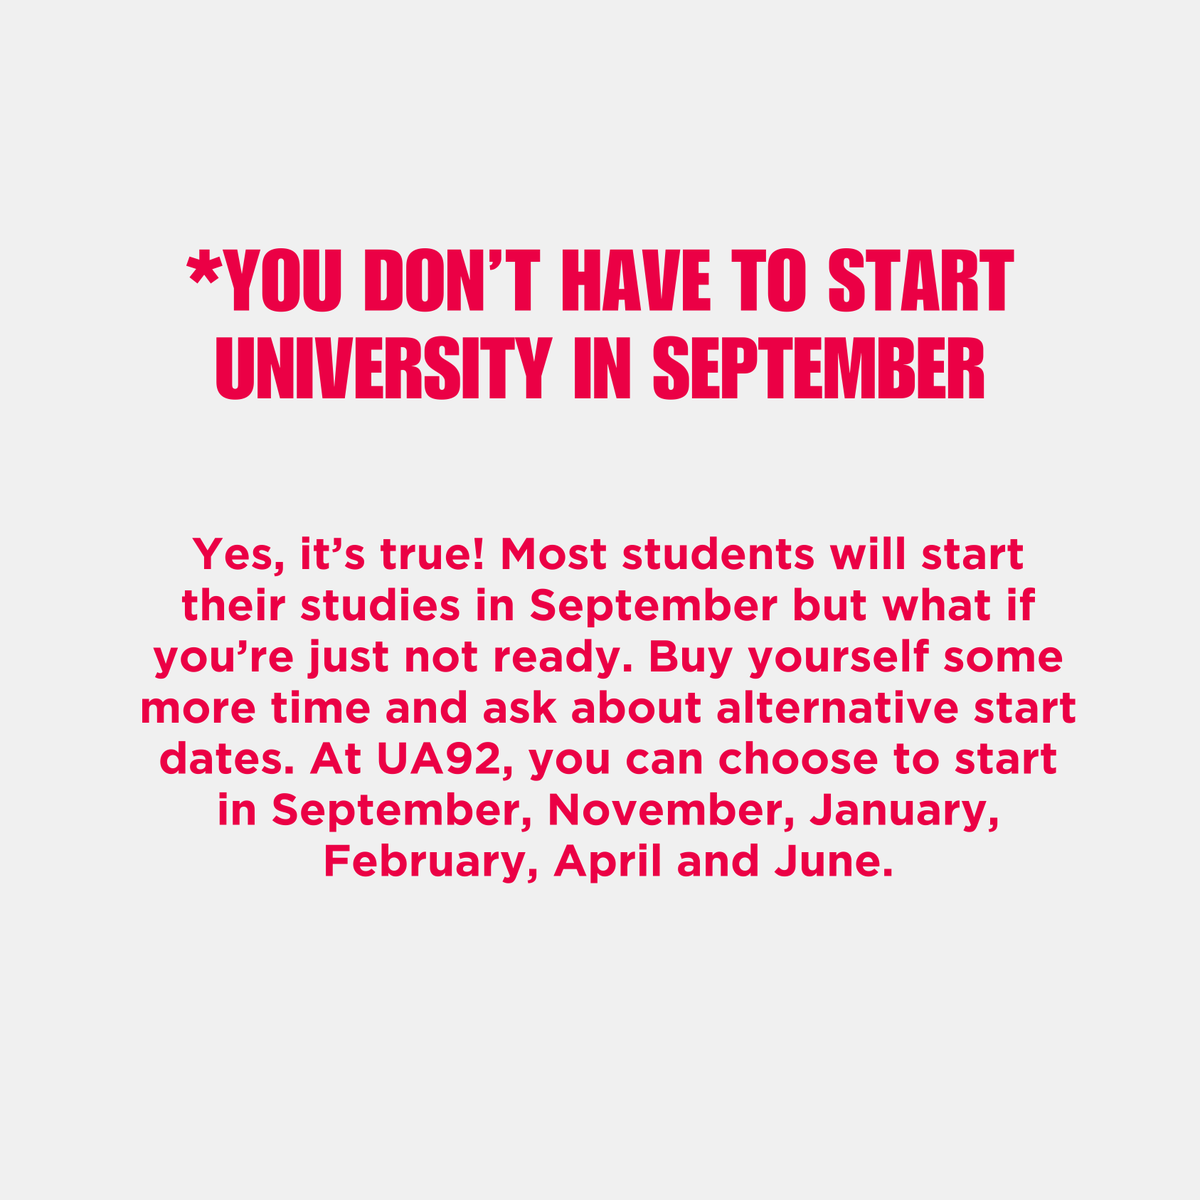 We're here to re-assure you that your uni dreams aren't over if you haven't submitted your application today, it's important to remember you still have options. Here's what the UCAS deadline* doesn't mean ☺️